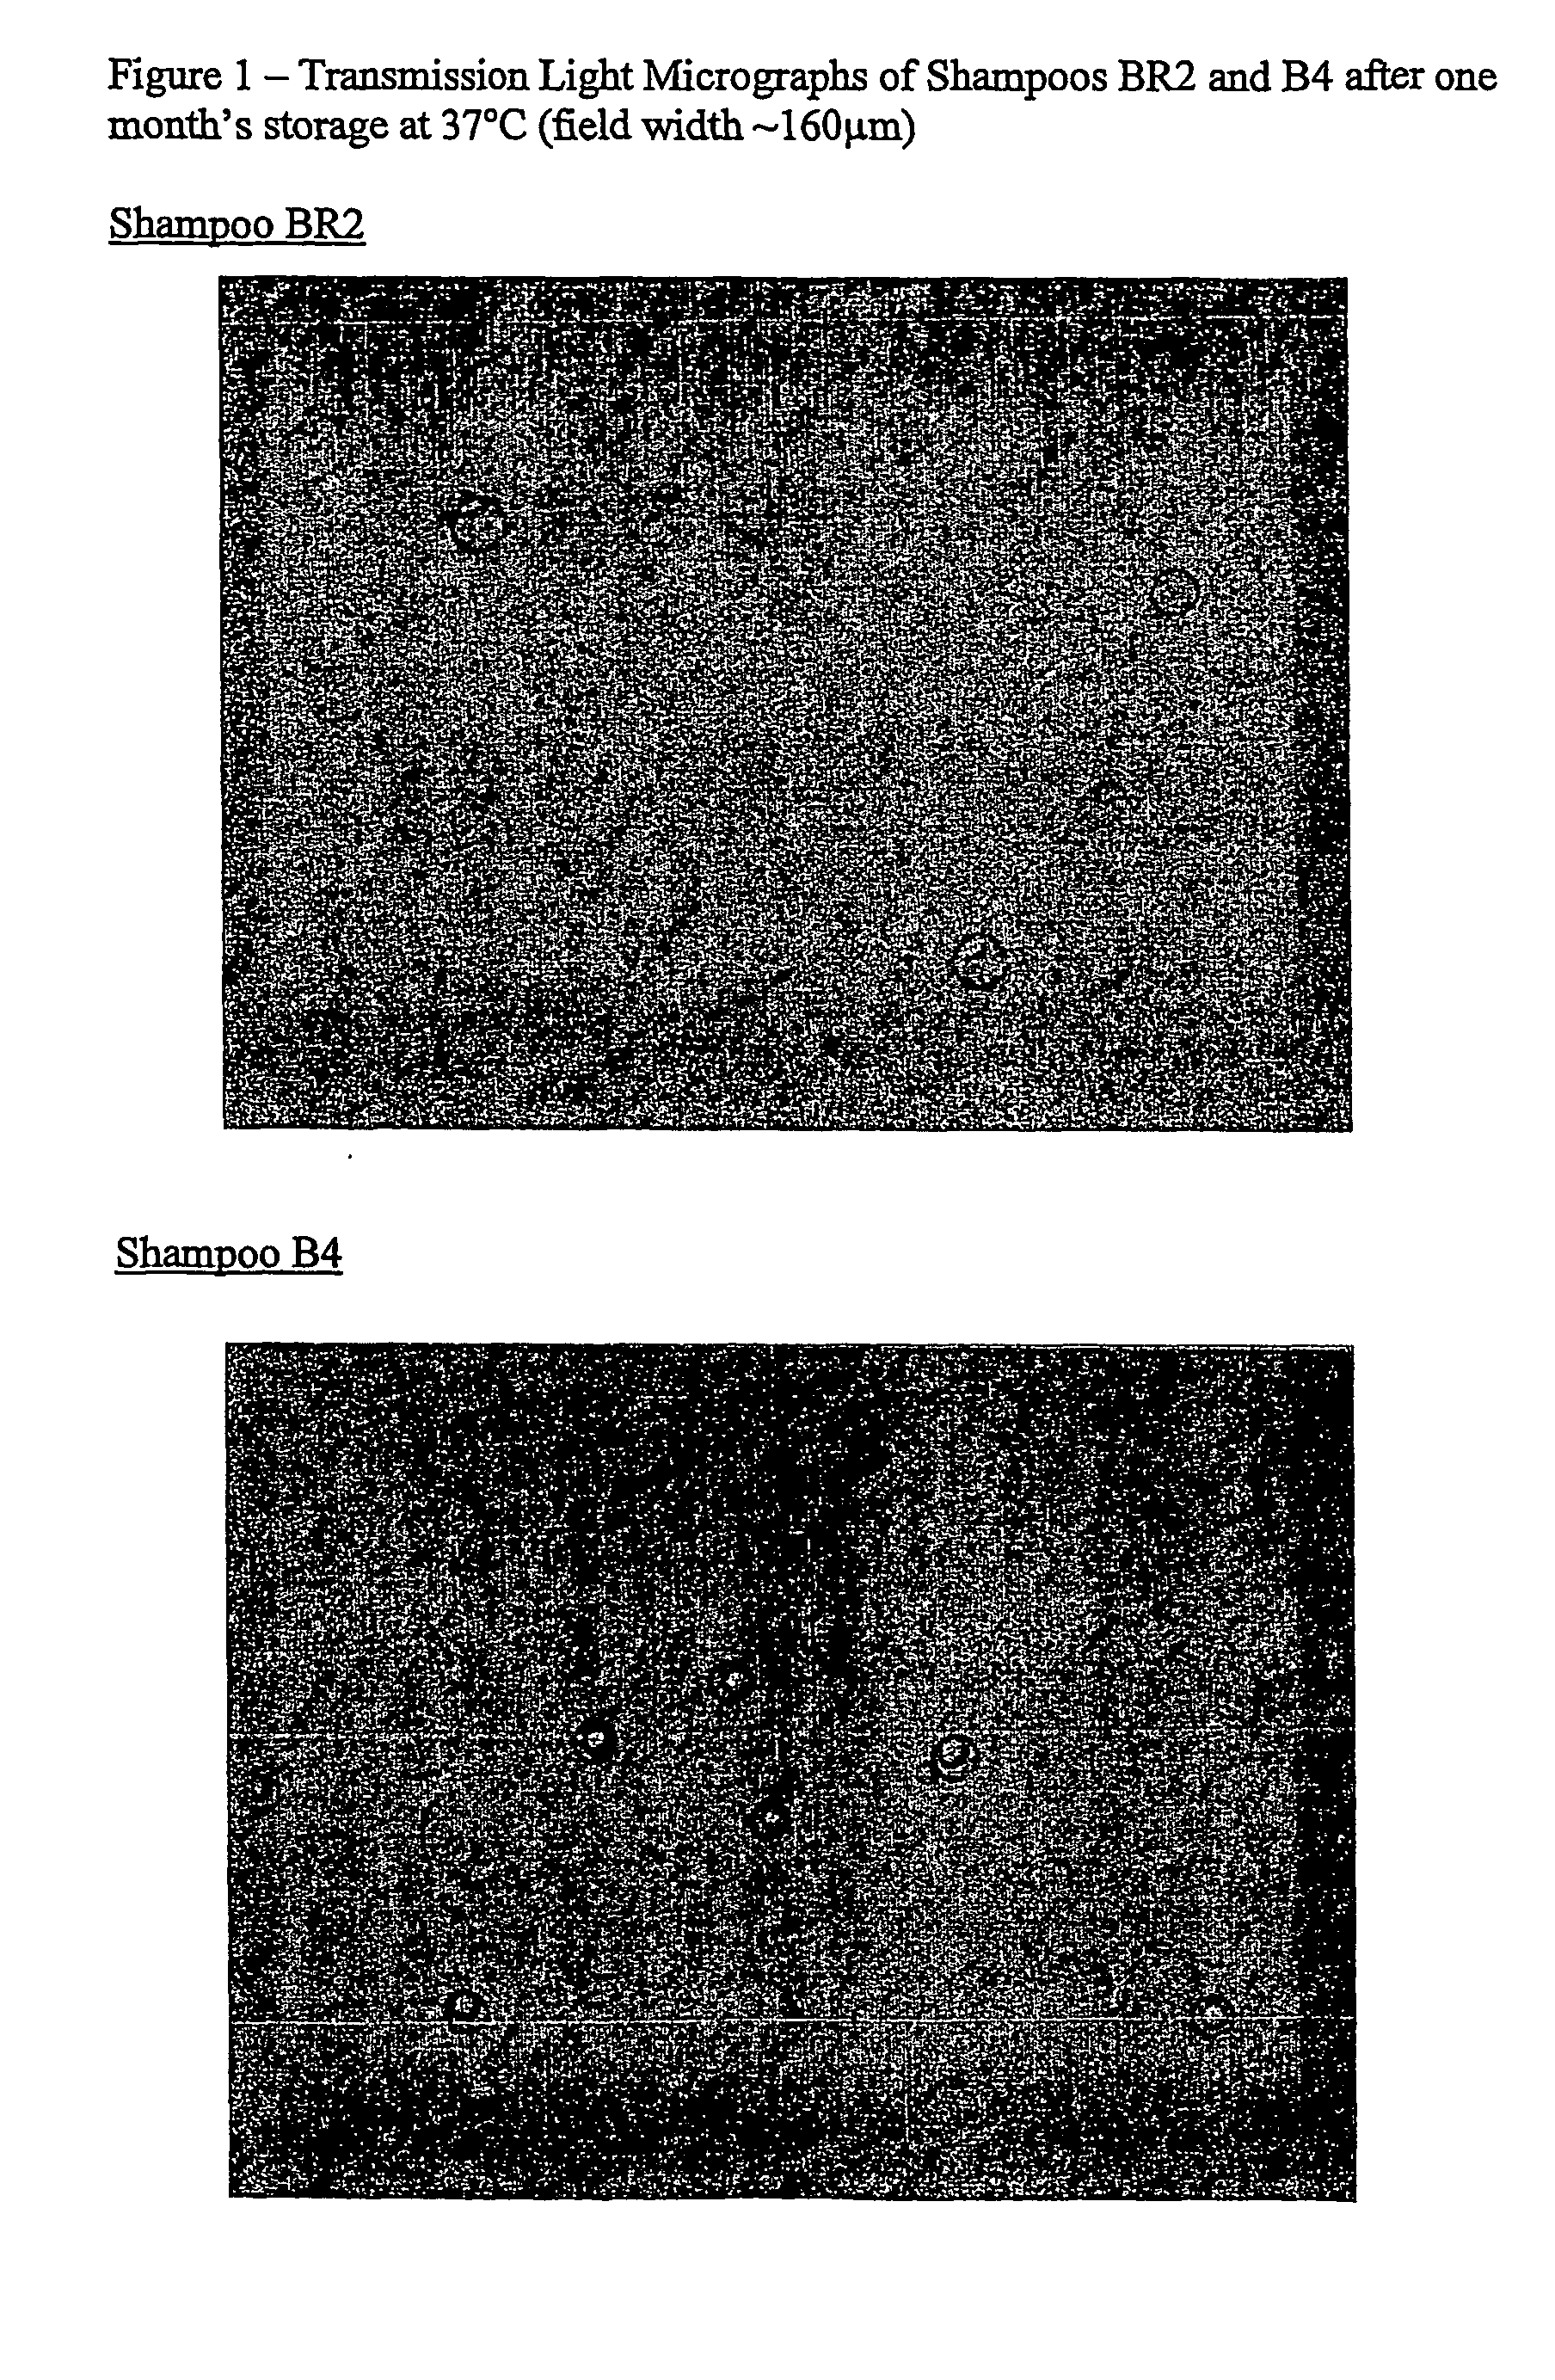 Compositions comprising encapsulated material